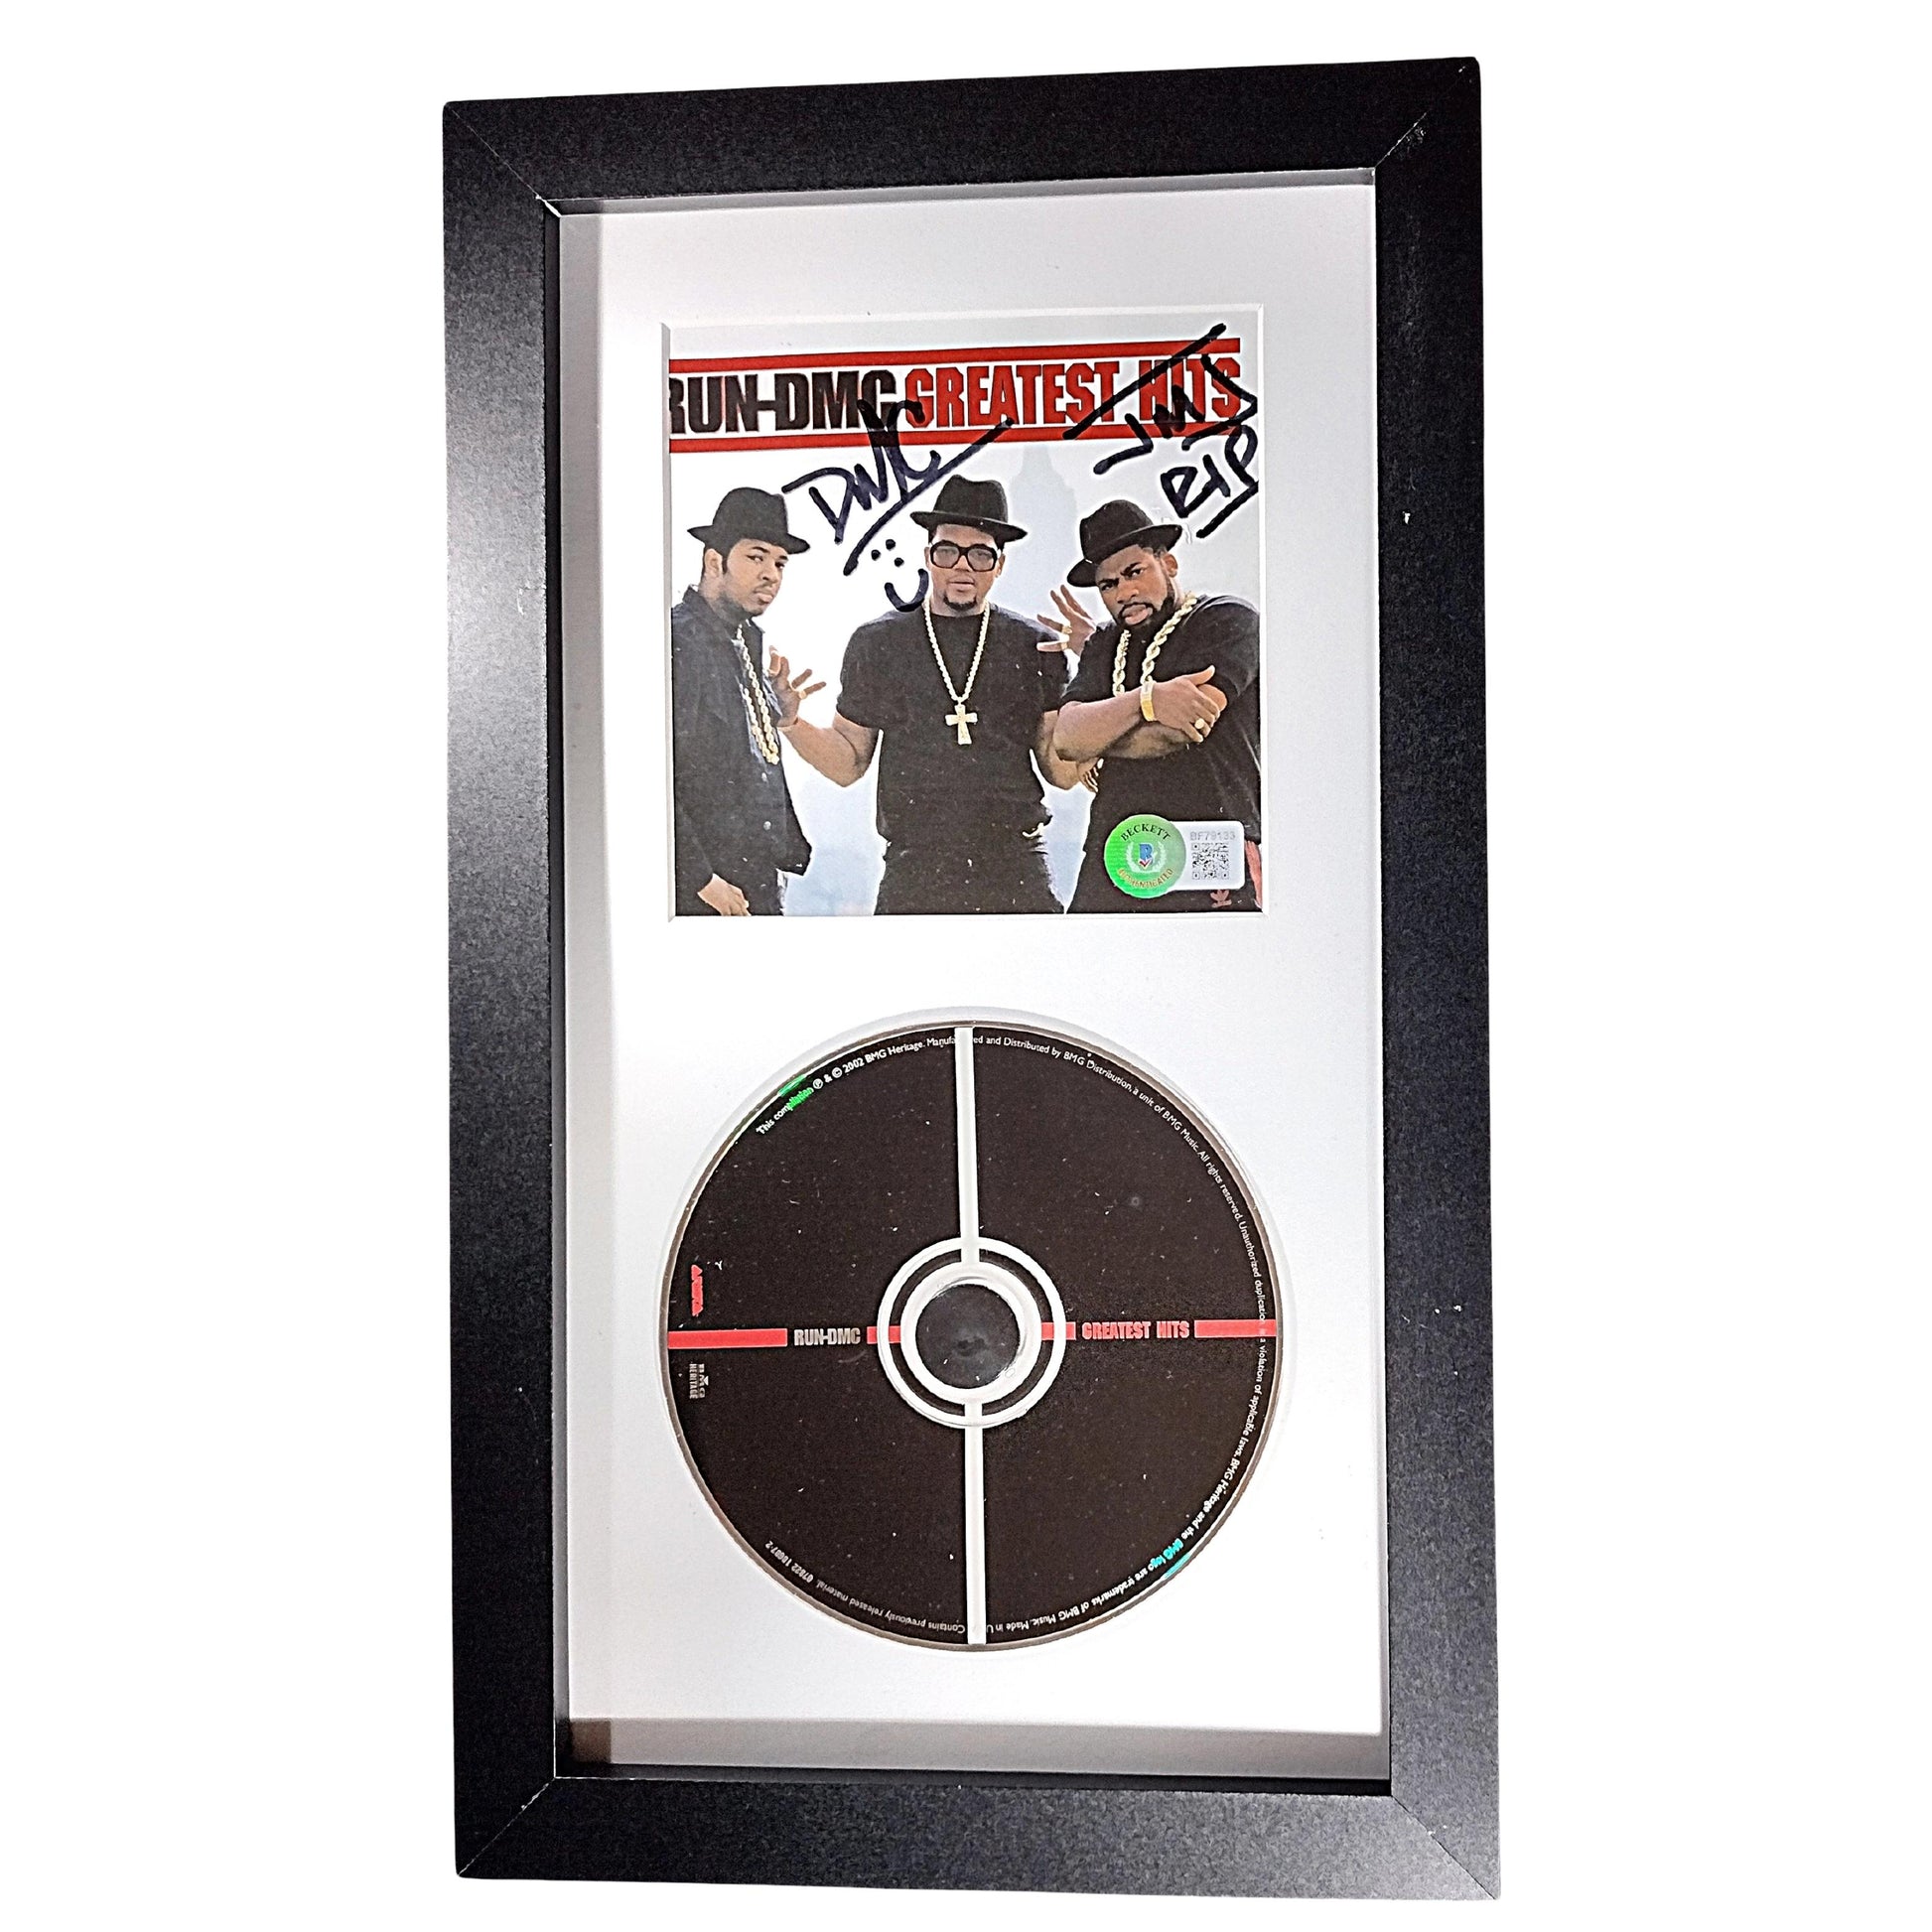 Music- Autographed- Darryl McDaniels Signed Run DMC Greatest Hits CD Cover Framed and Matted Wall Display Beckett Authentication 101